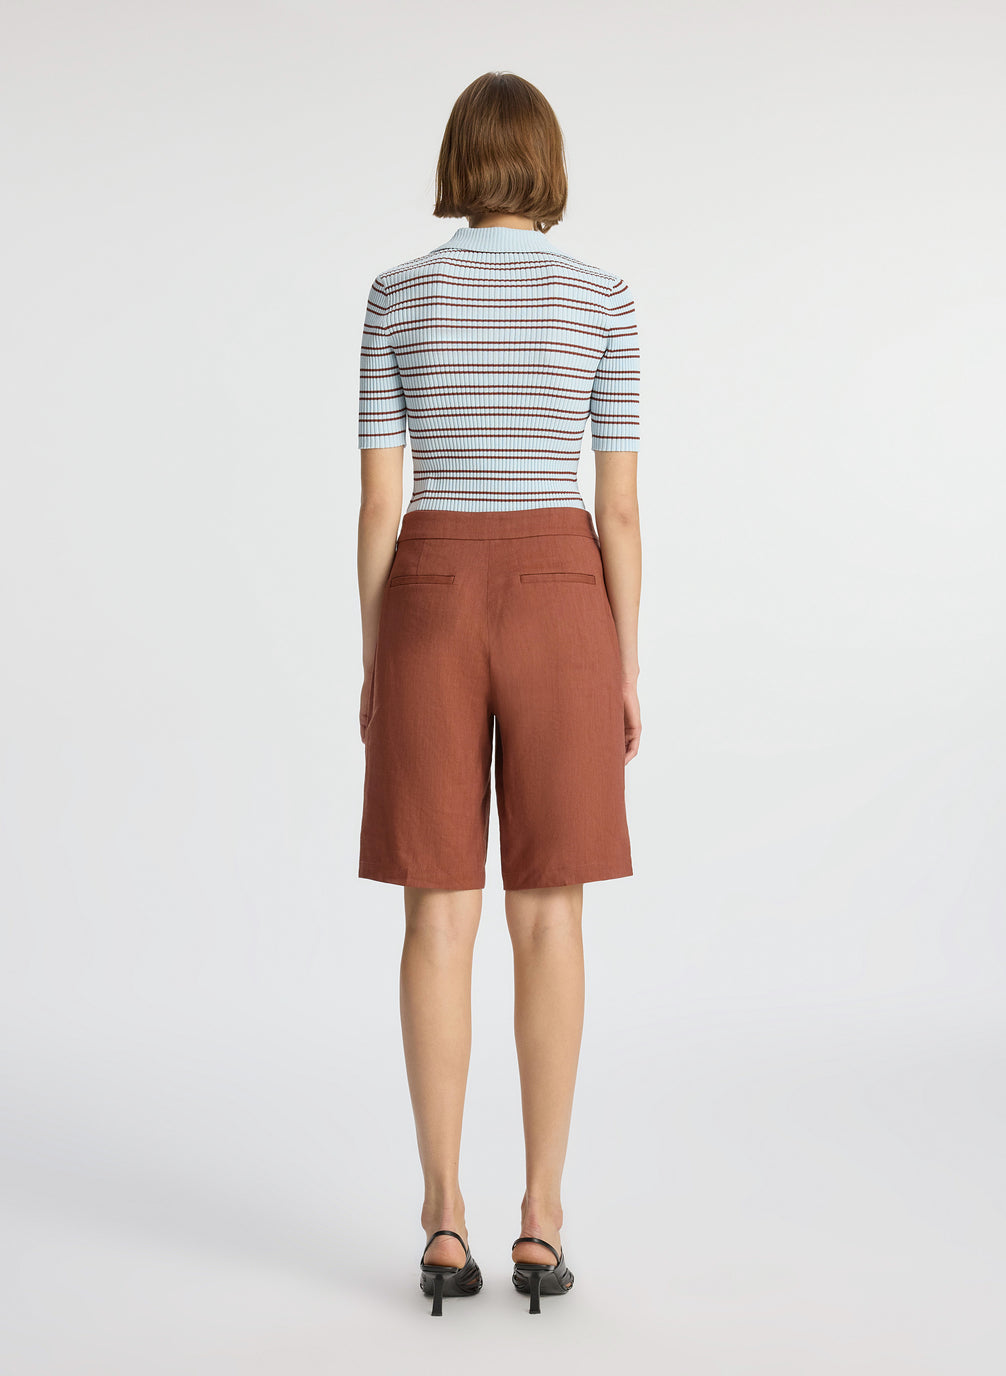 back view of woman wearing blue and brown striped shirt and brown shorts